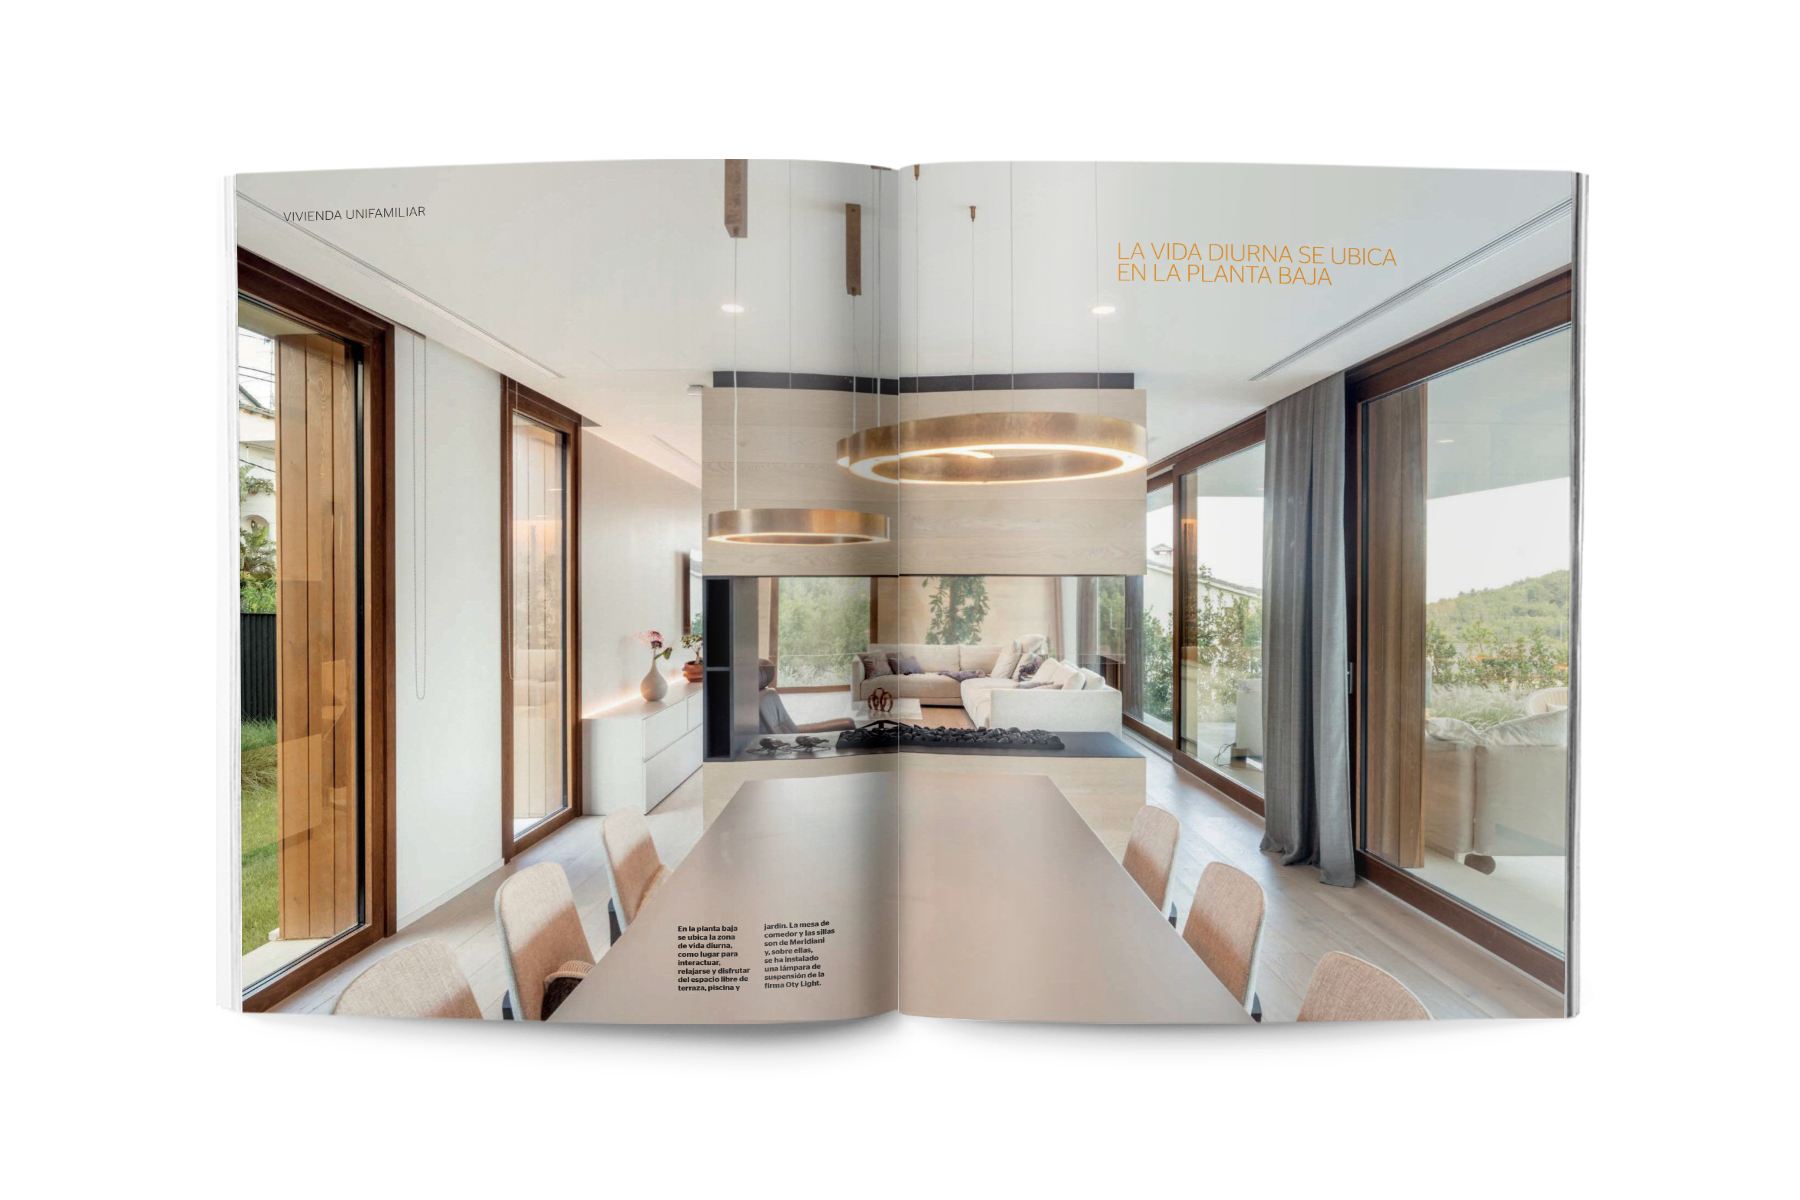 "A house oriented towards landscape " Our residential project Panoramic House has been published in CASA VIVA's magazine number 287.